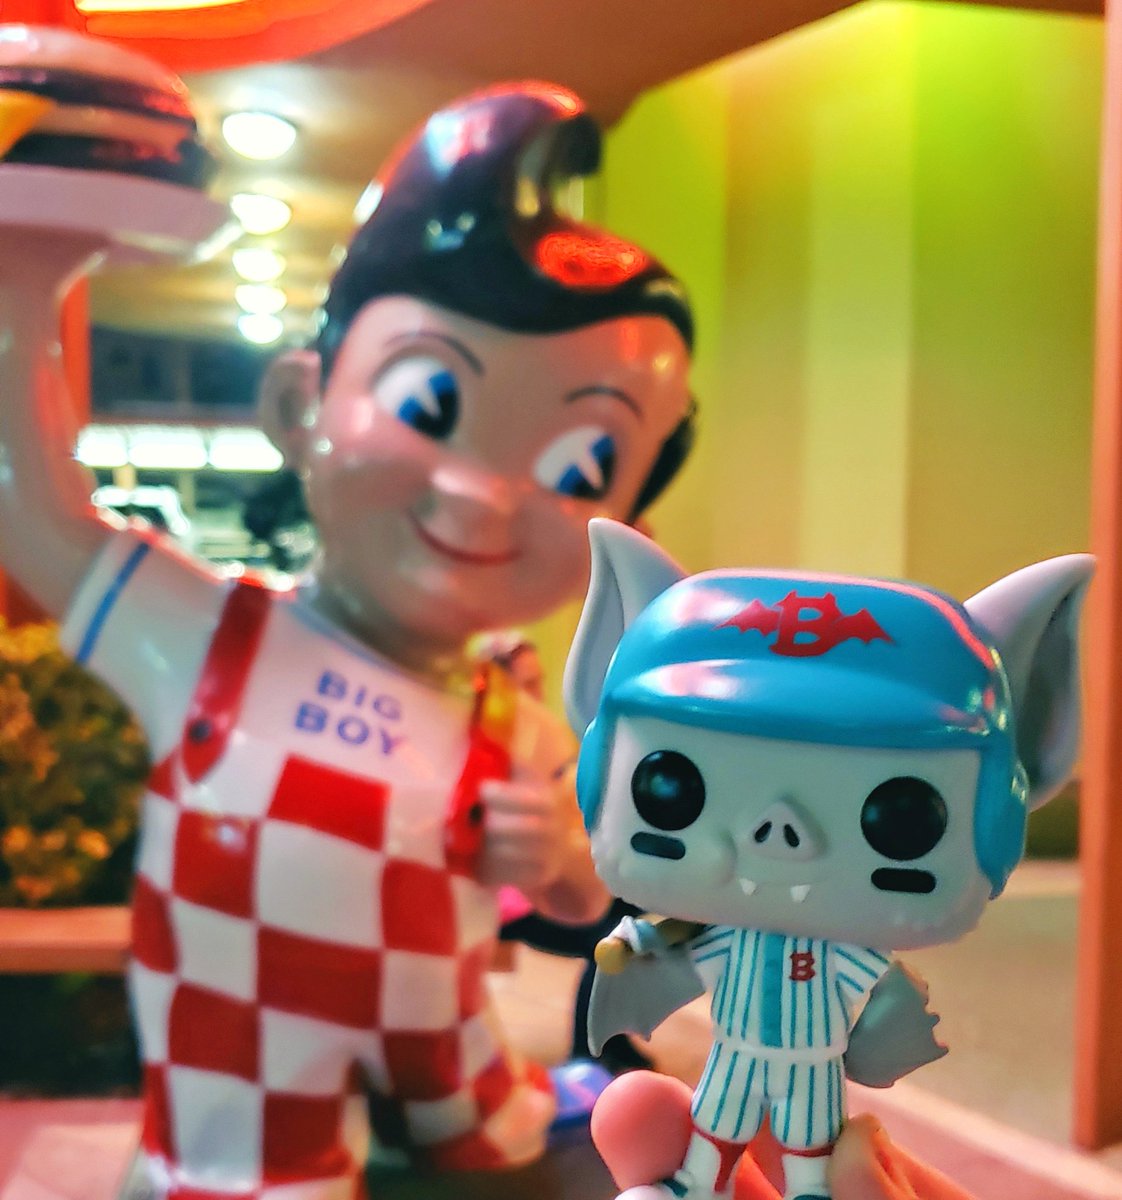 There's a first time for everything! #BobsBigBoy